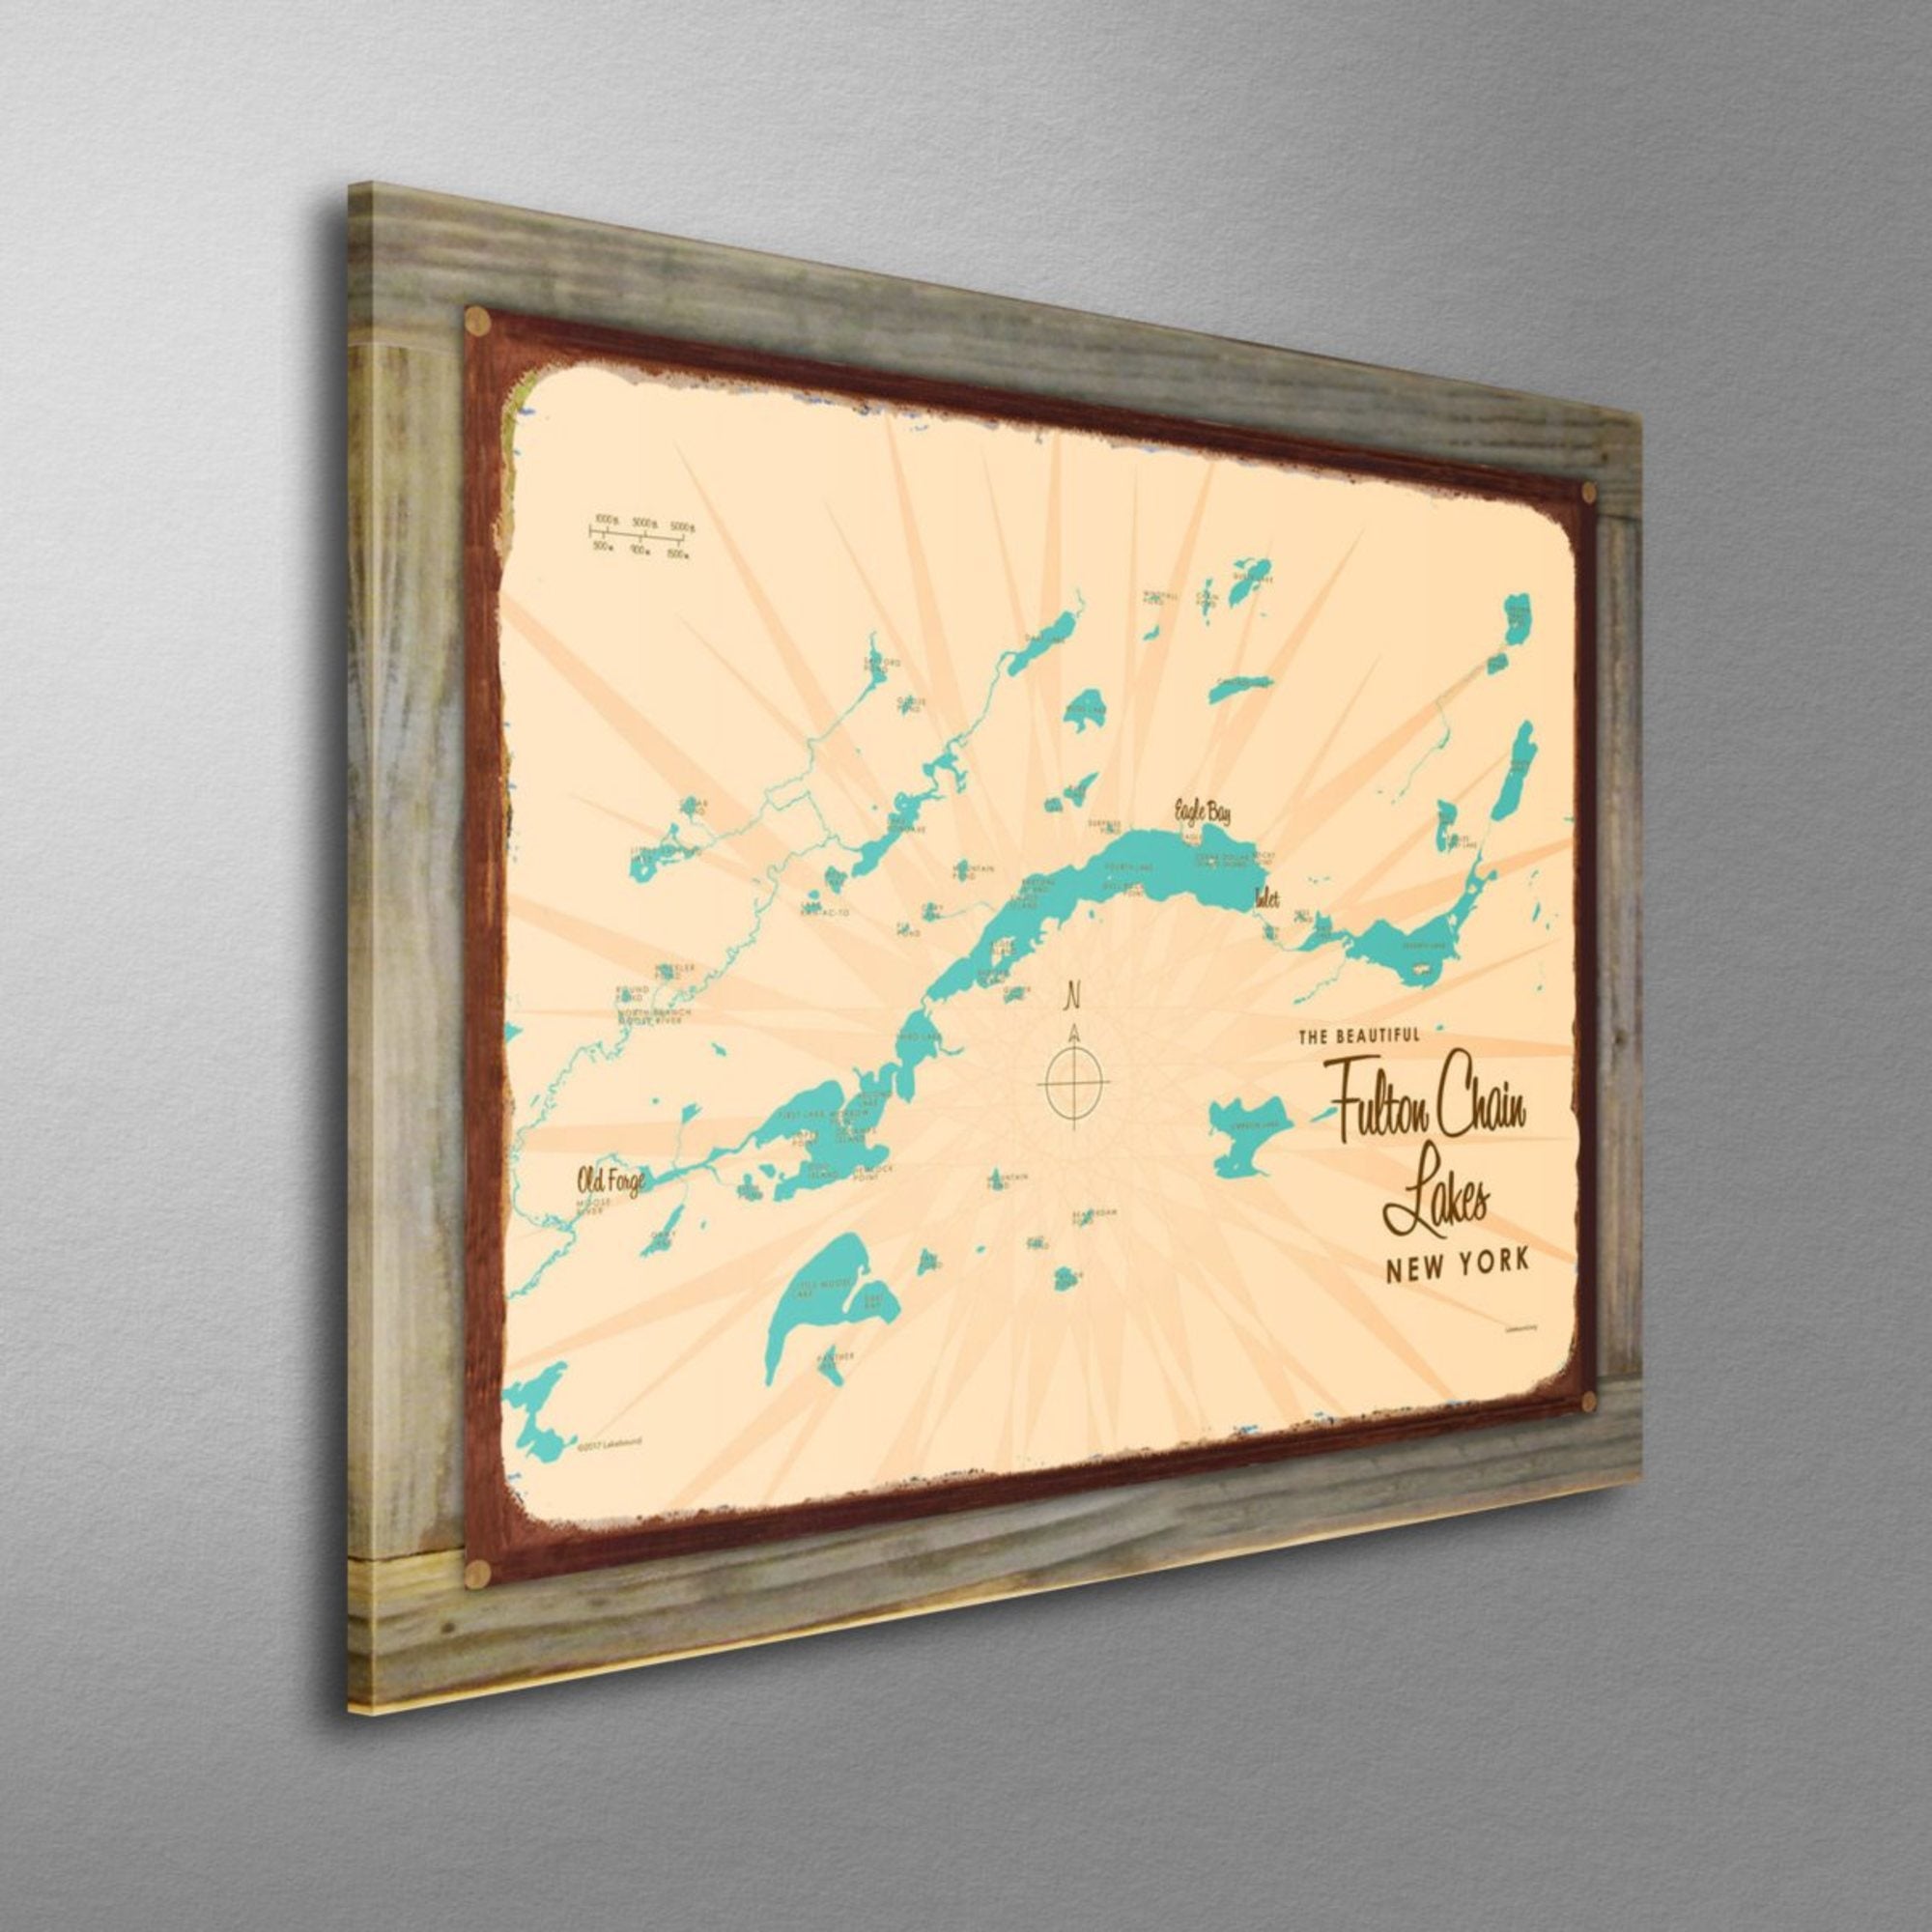 Fulton Chain of Lakes New York, Wood-Mounted Rustic Metal Sign Map Art